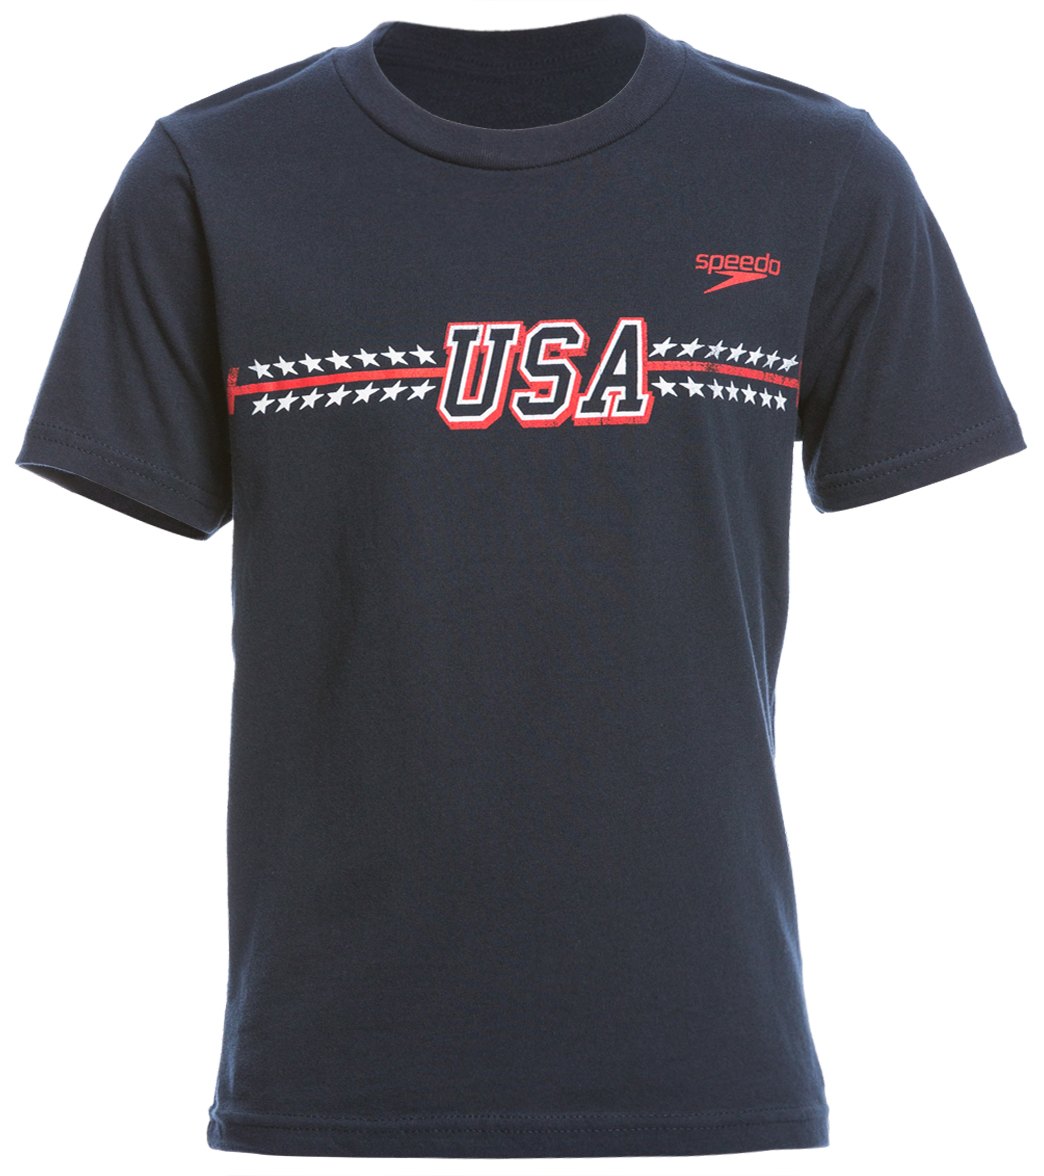 Speedo Youth Men's Coughlin Jersey Tee Shirt - Navy Small Cotton/Polyester - Swimoutlet.com